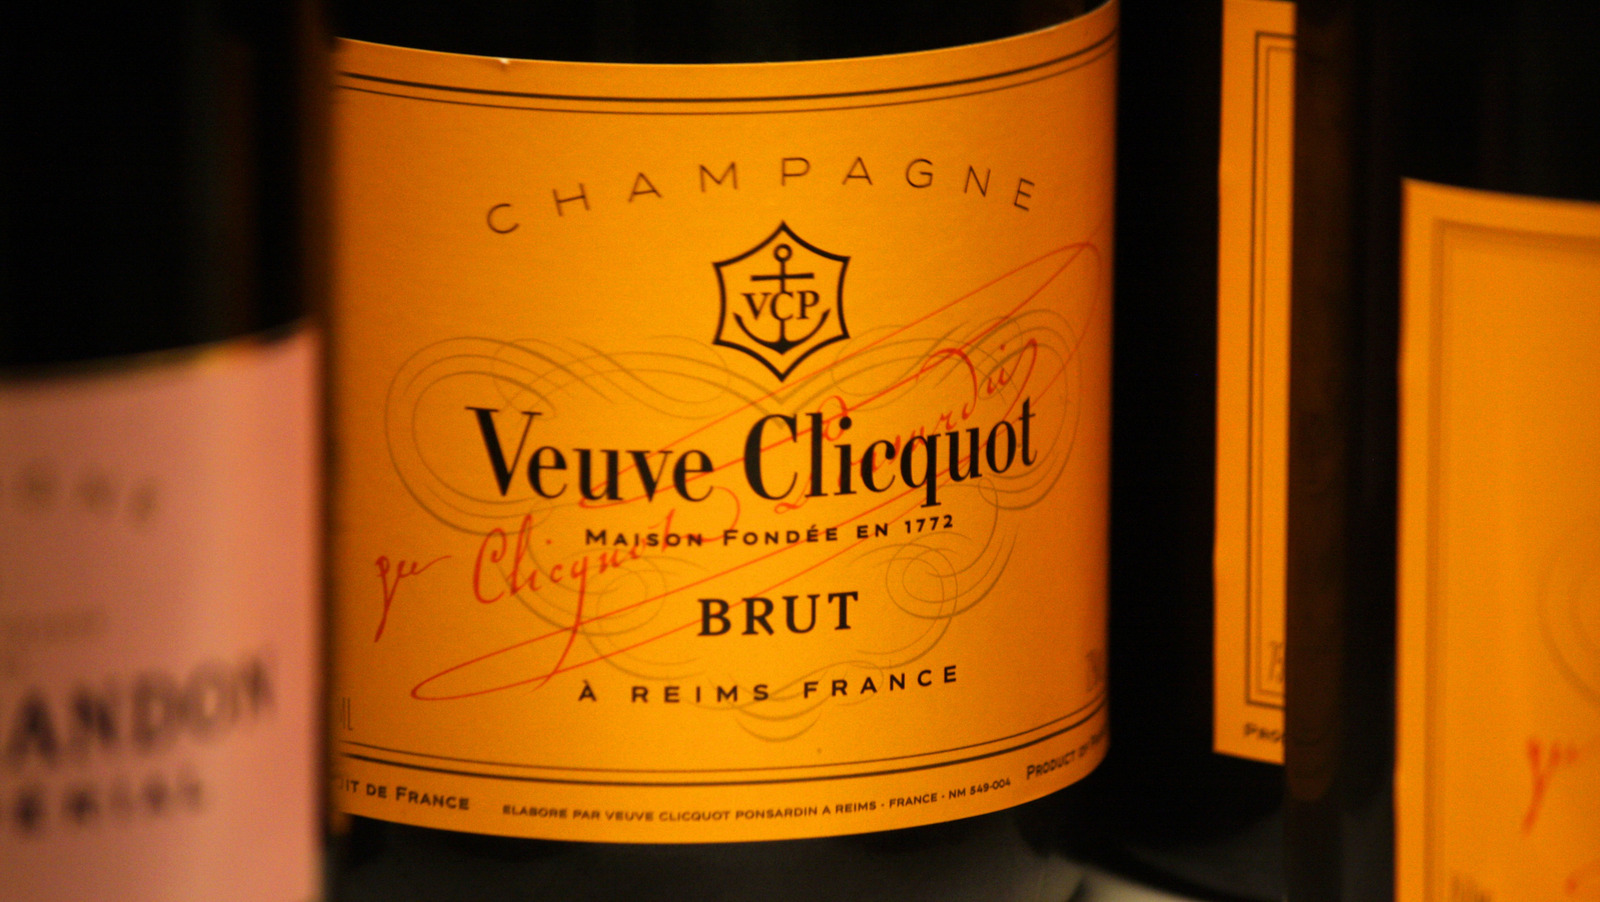 Veuve Clicquot's Obsession With Bringing Depth to Champagne